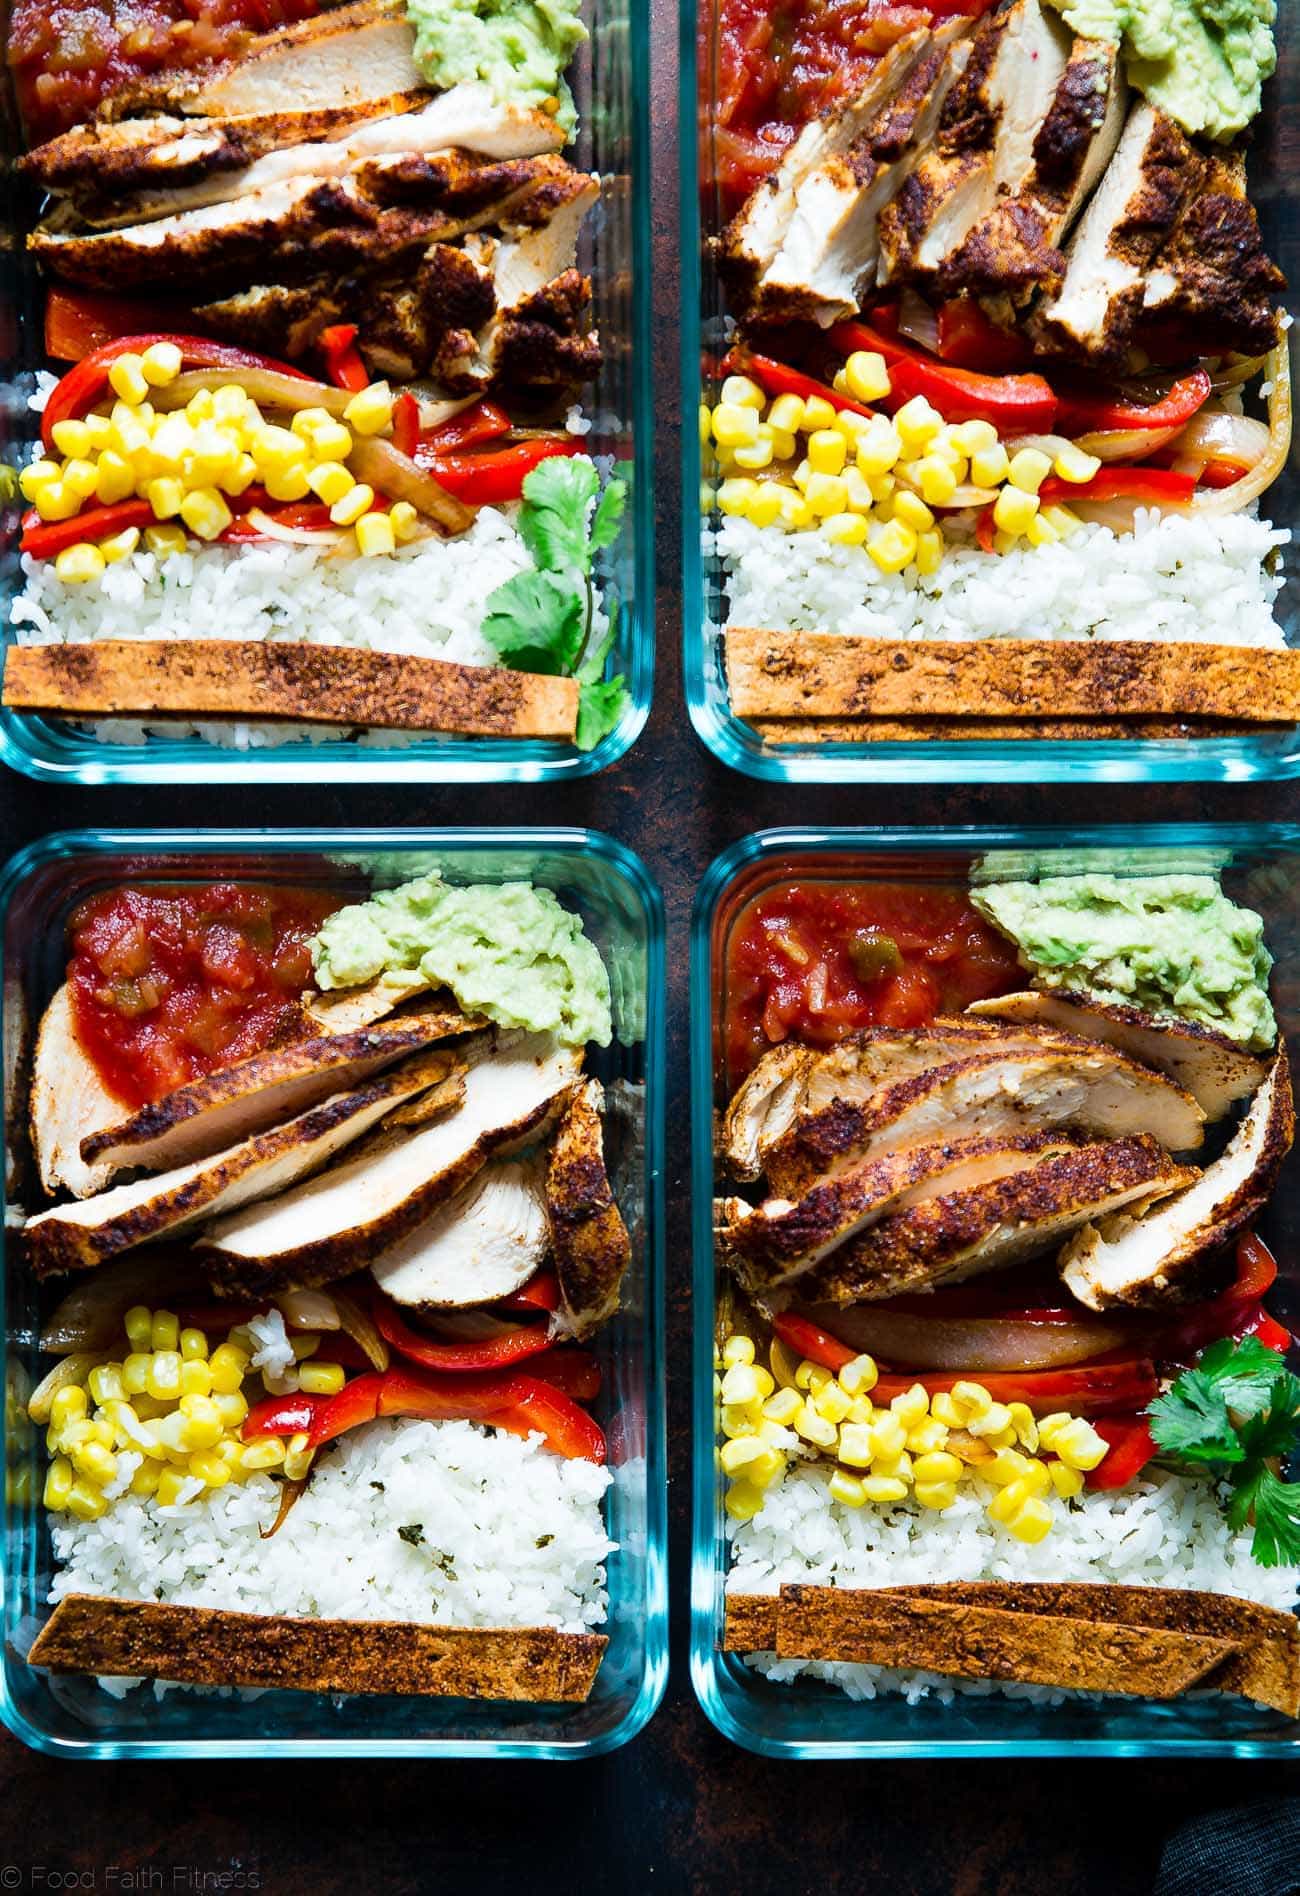 Meal Prep Chicken Burrito Bowls - This healthy, gluten free chicken burrito bowl recipe can be made ahead of time, so it's ready to go for busy days. It's an easy, dairy-free delicious desk lunch option! | Foodfaithfitness.com | @FoodFaithFit